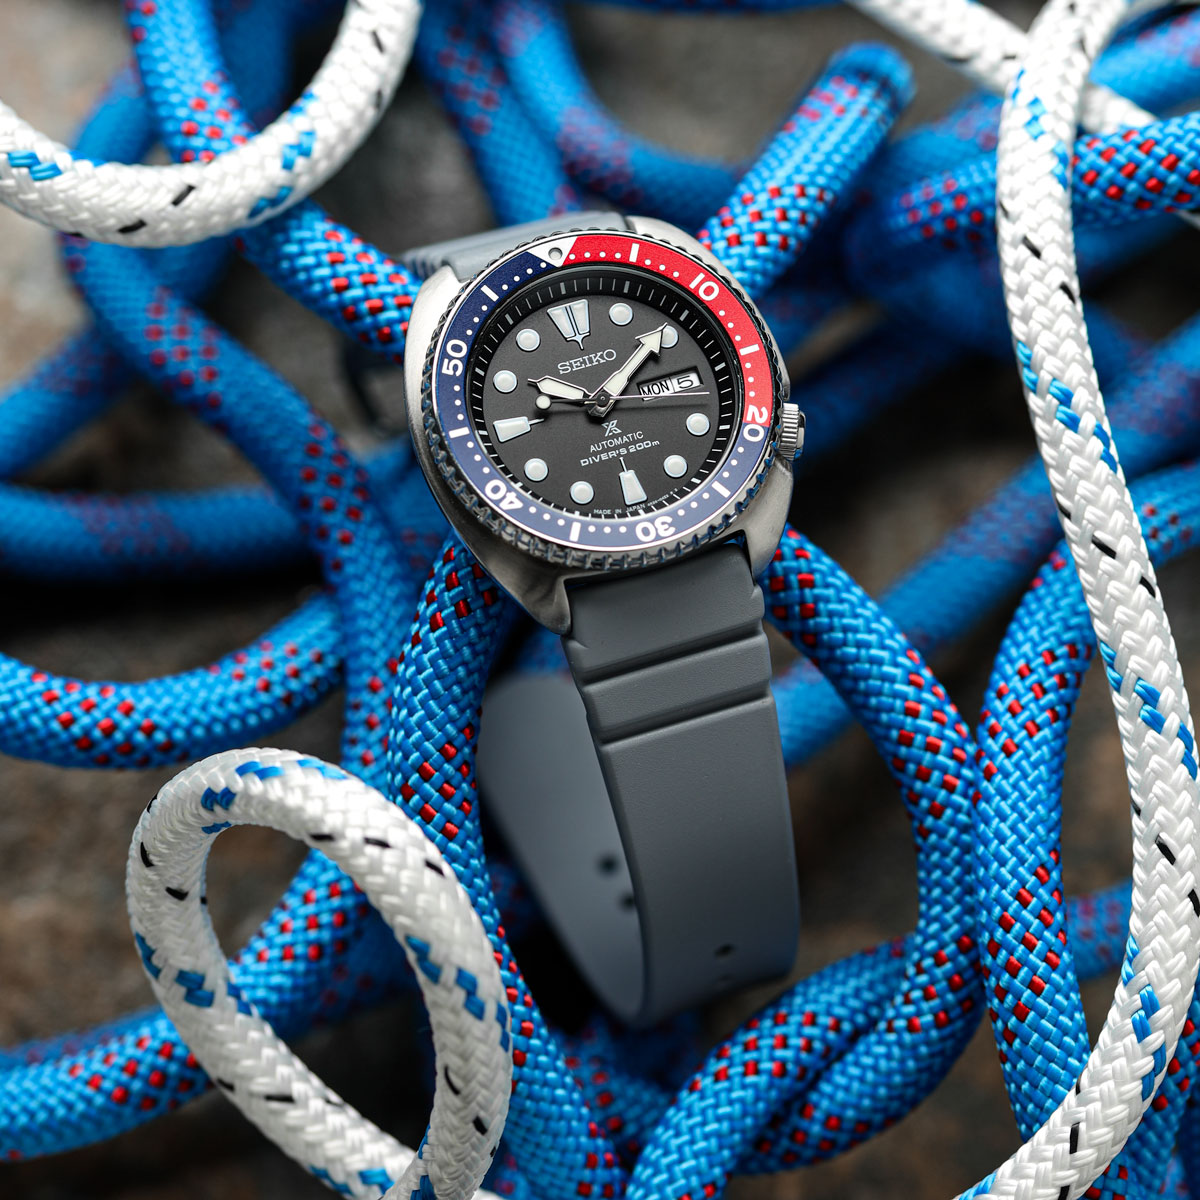 ZULUDIVER 284 Italian Rubber Dive Watch Strap - Light Grey - additional image 1